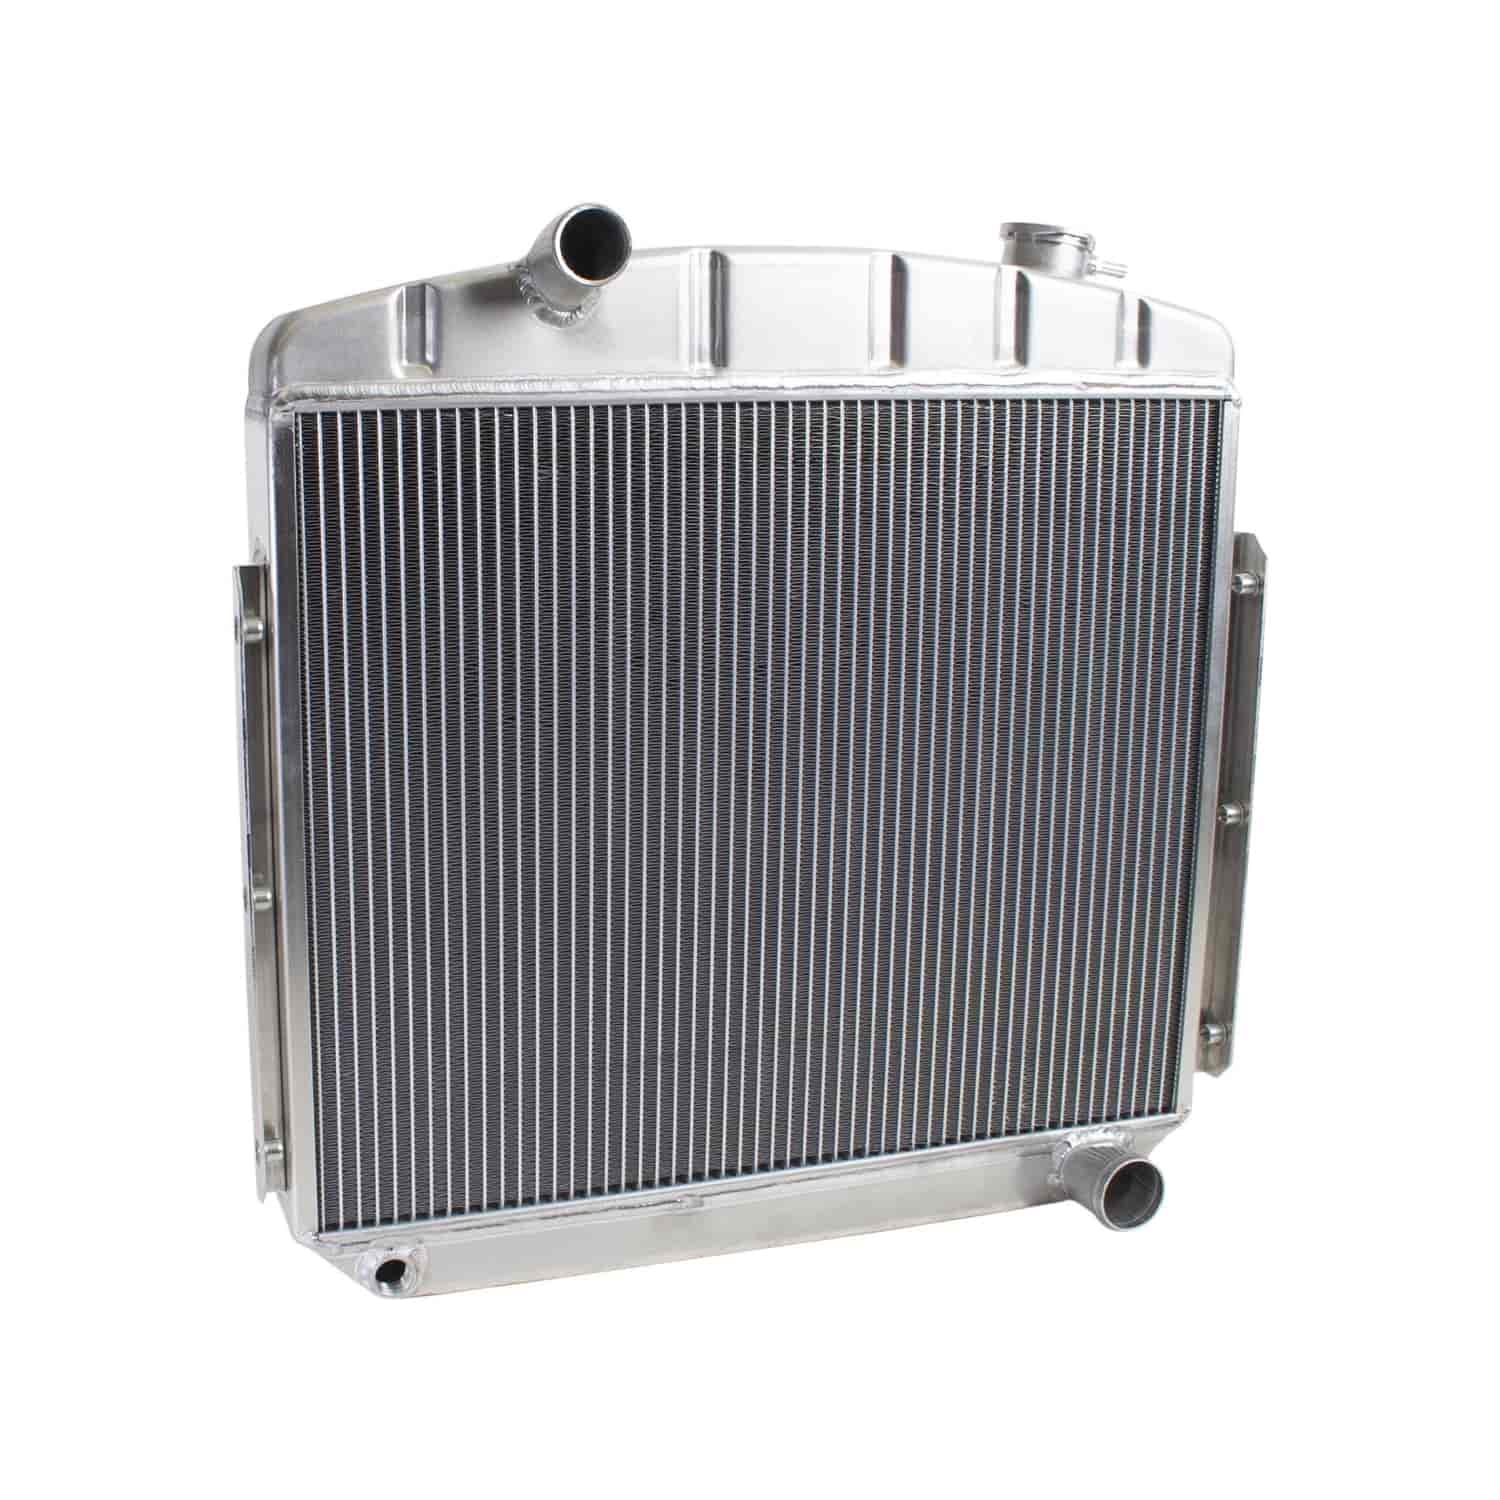 ExactFit Radiator for 1957 Chevrolet Car for Chevy L6 Mount